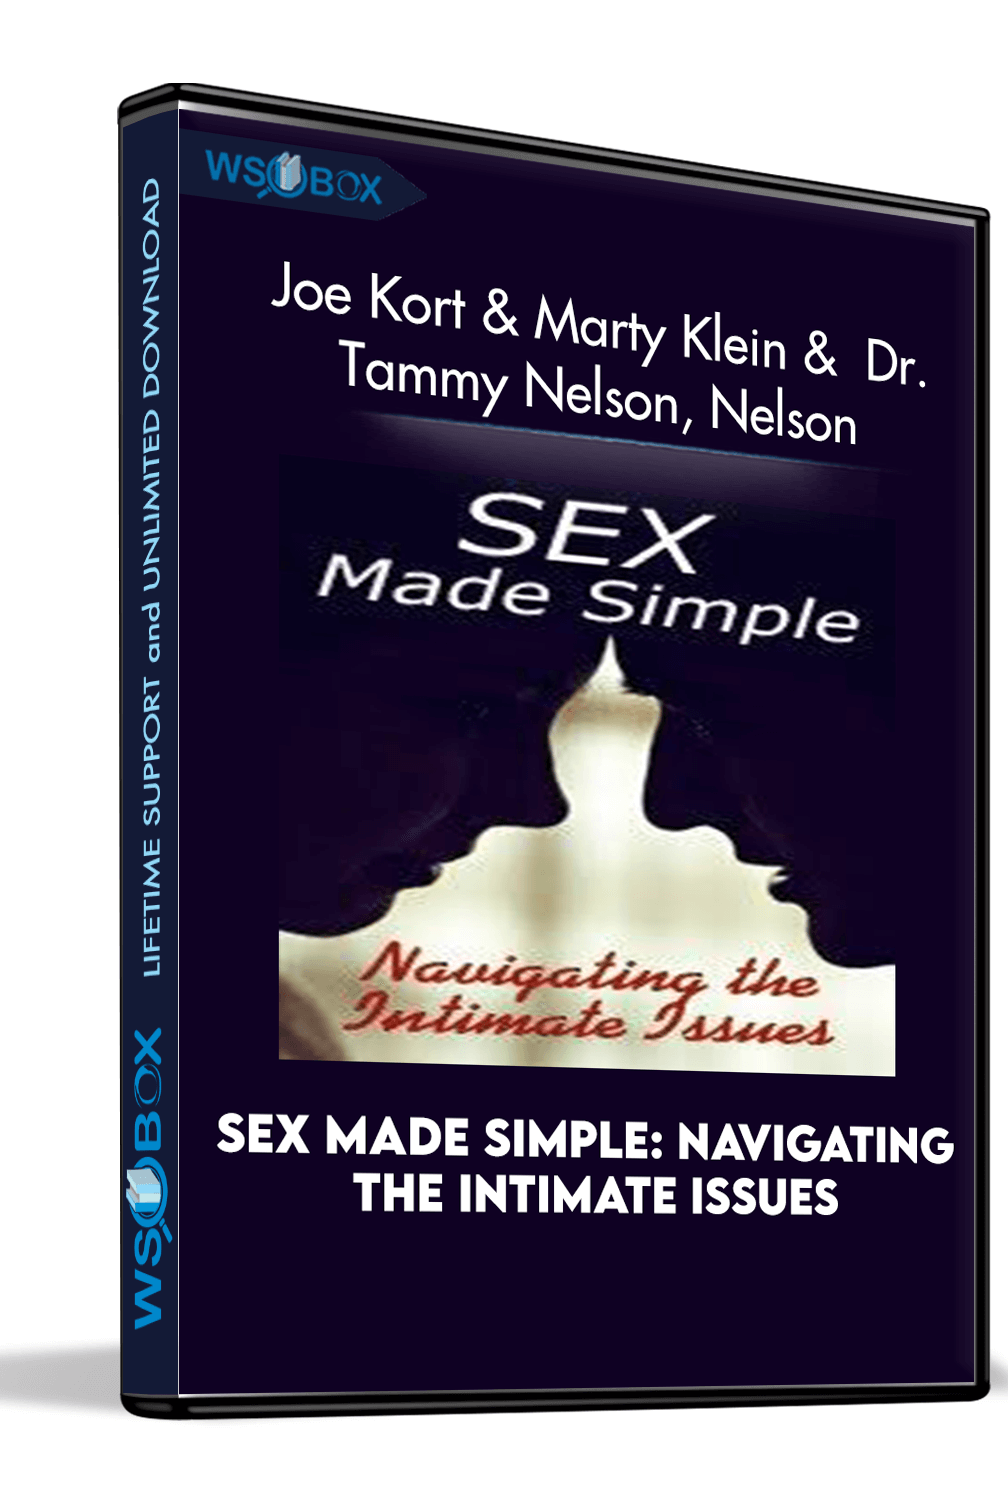 sex-made-simple-navigating-the-intimate-issues-joe-kort-marty-klein-dr-tammy-nelson-nelson